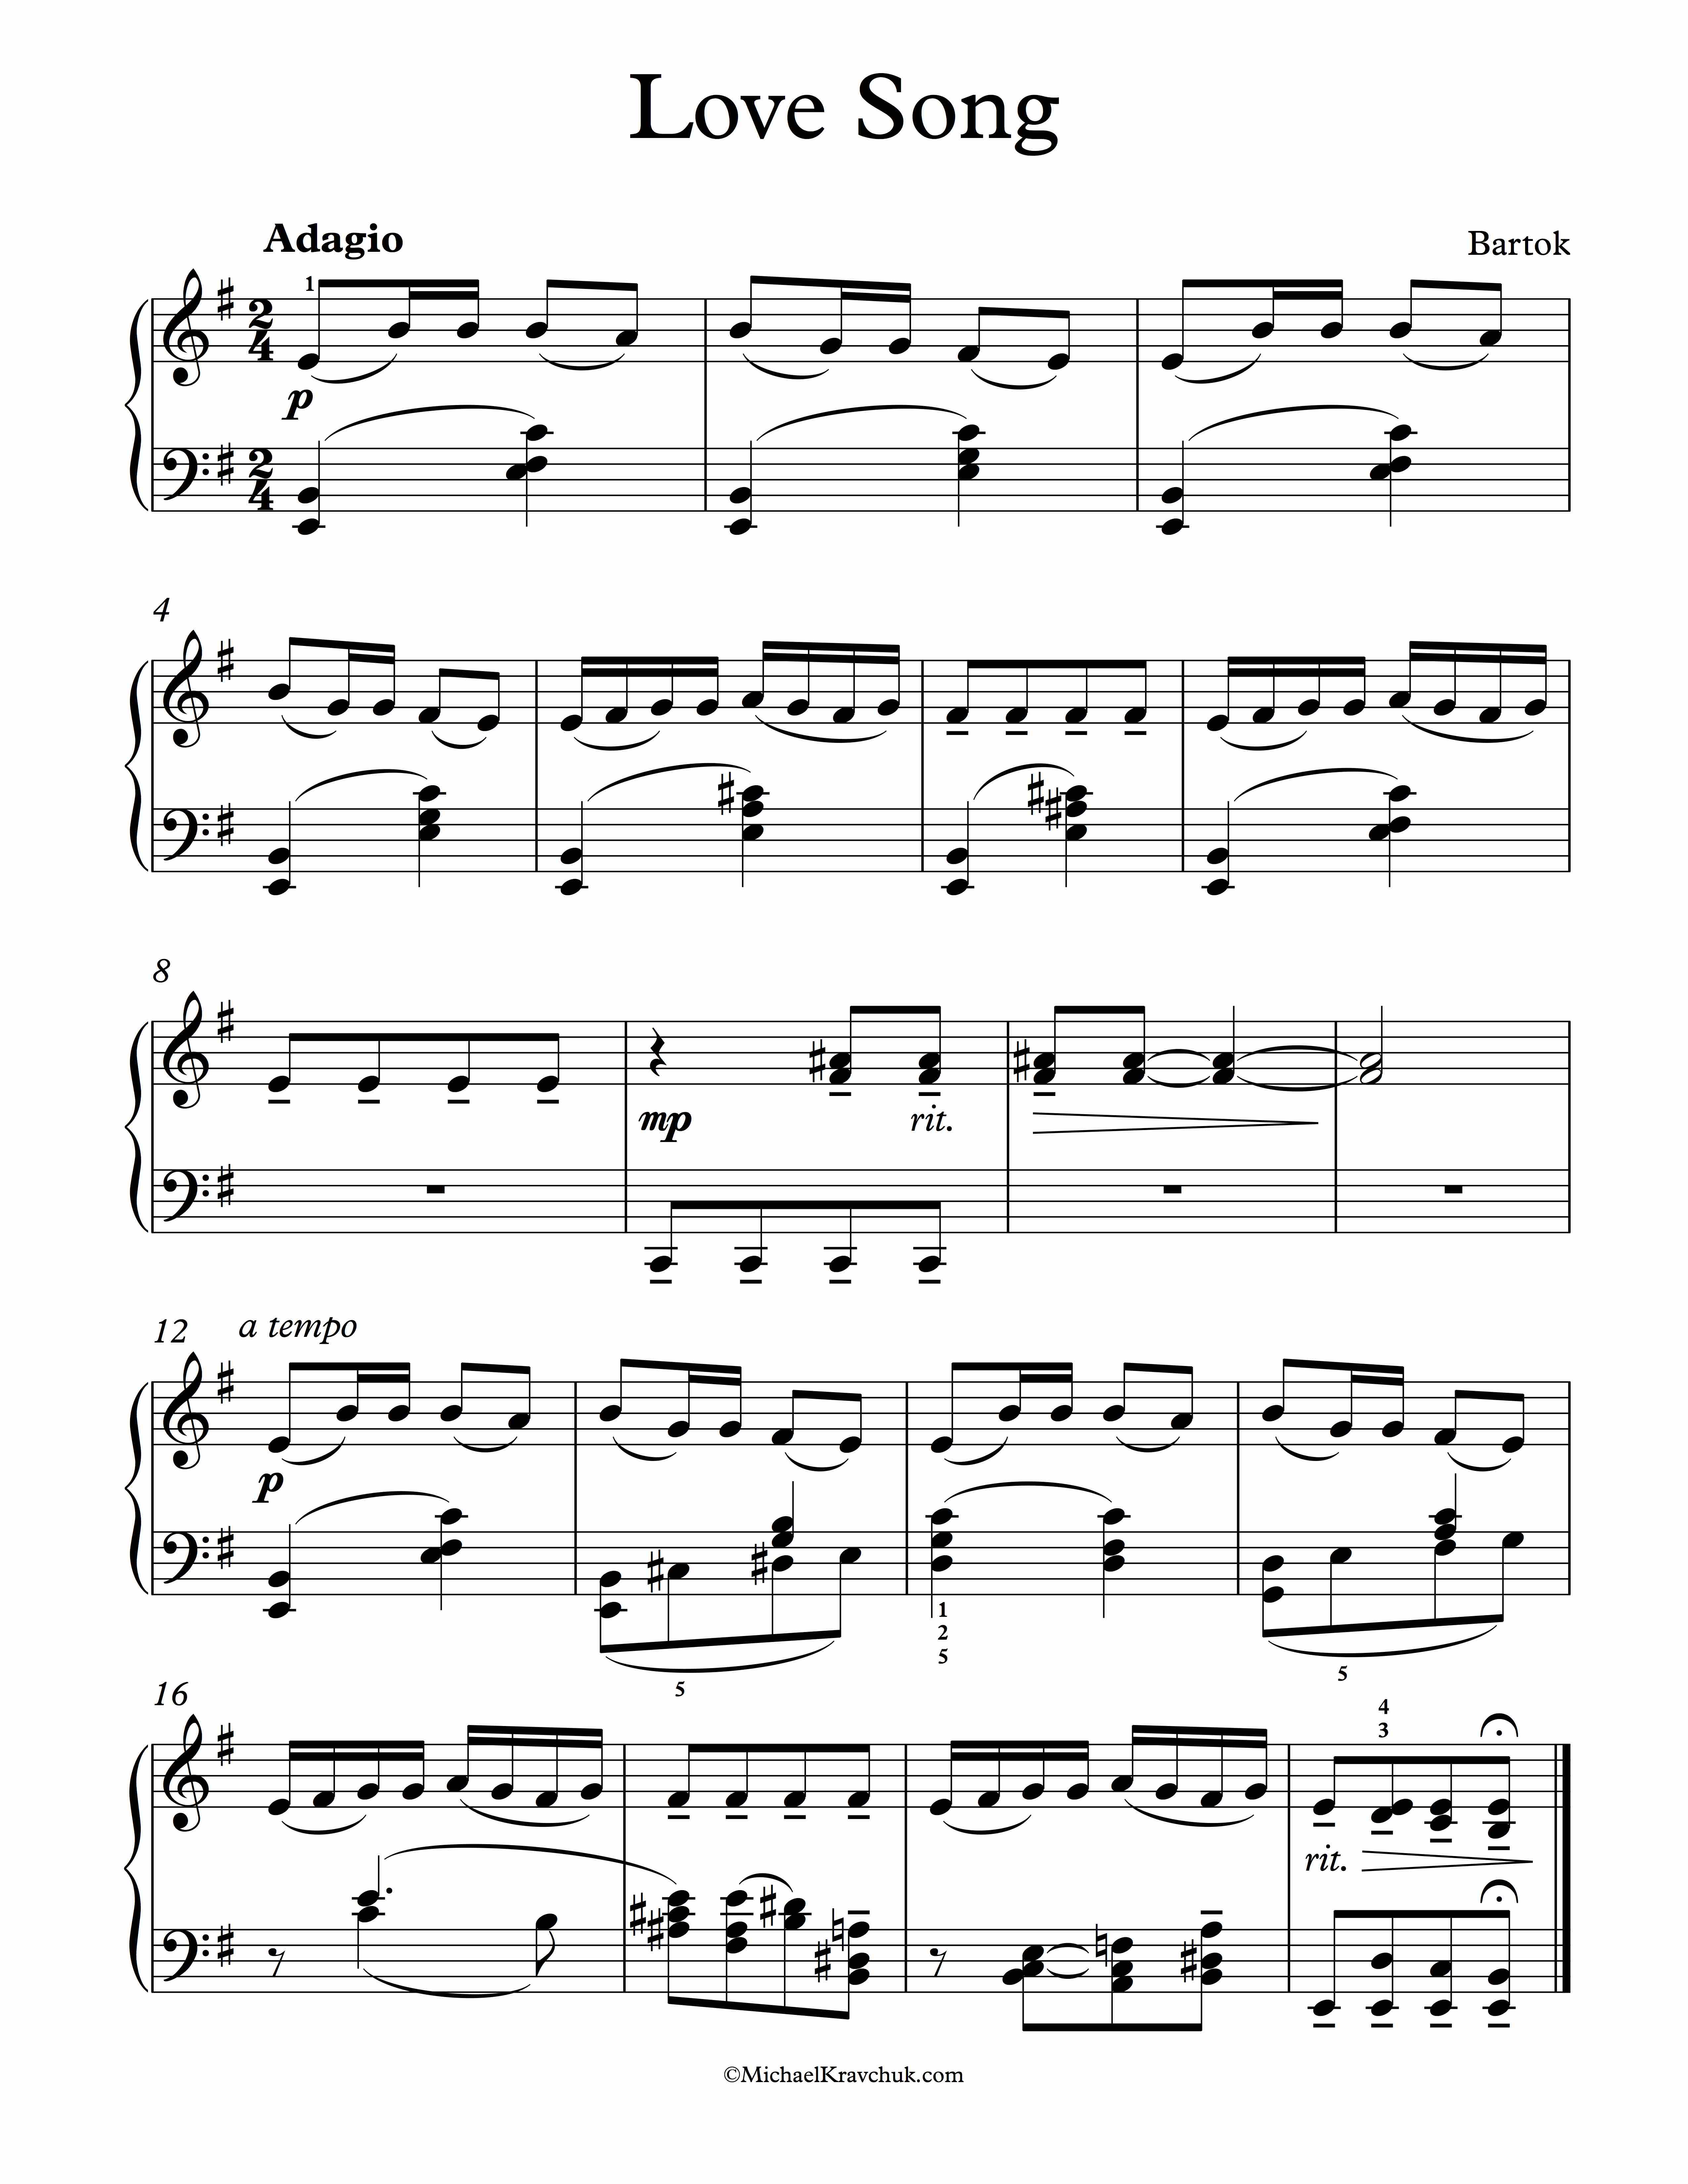 Free Piano Sheet Music - Love Song, From For Children - Bartok